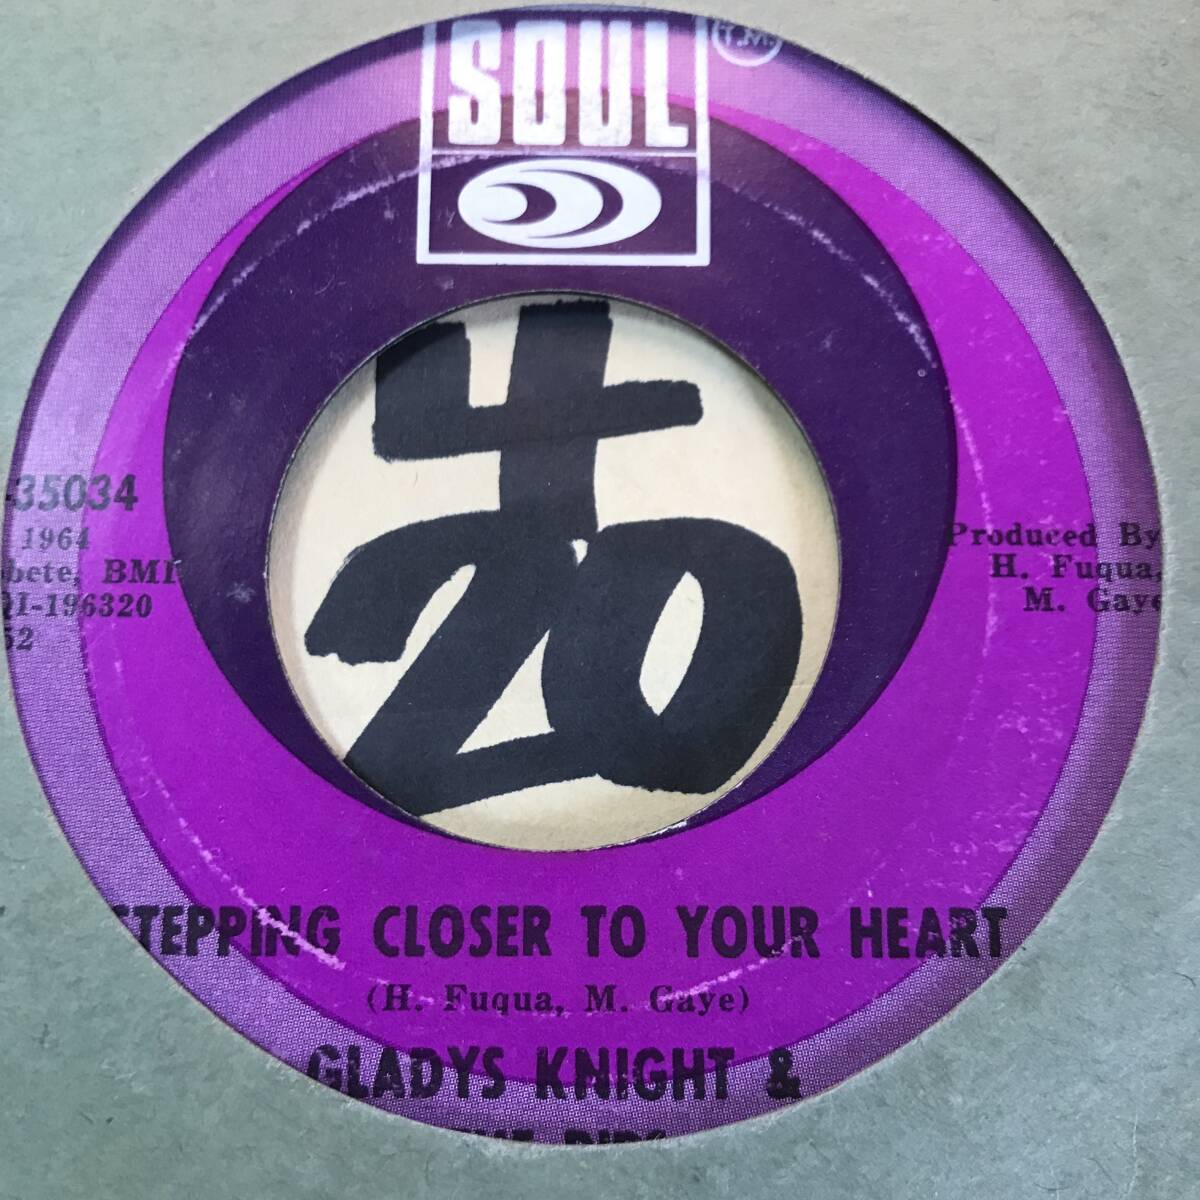  audition GLADYS KNIGHT & THE PIPS EVERYBODY NEEDS LOVE both sides NM